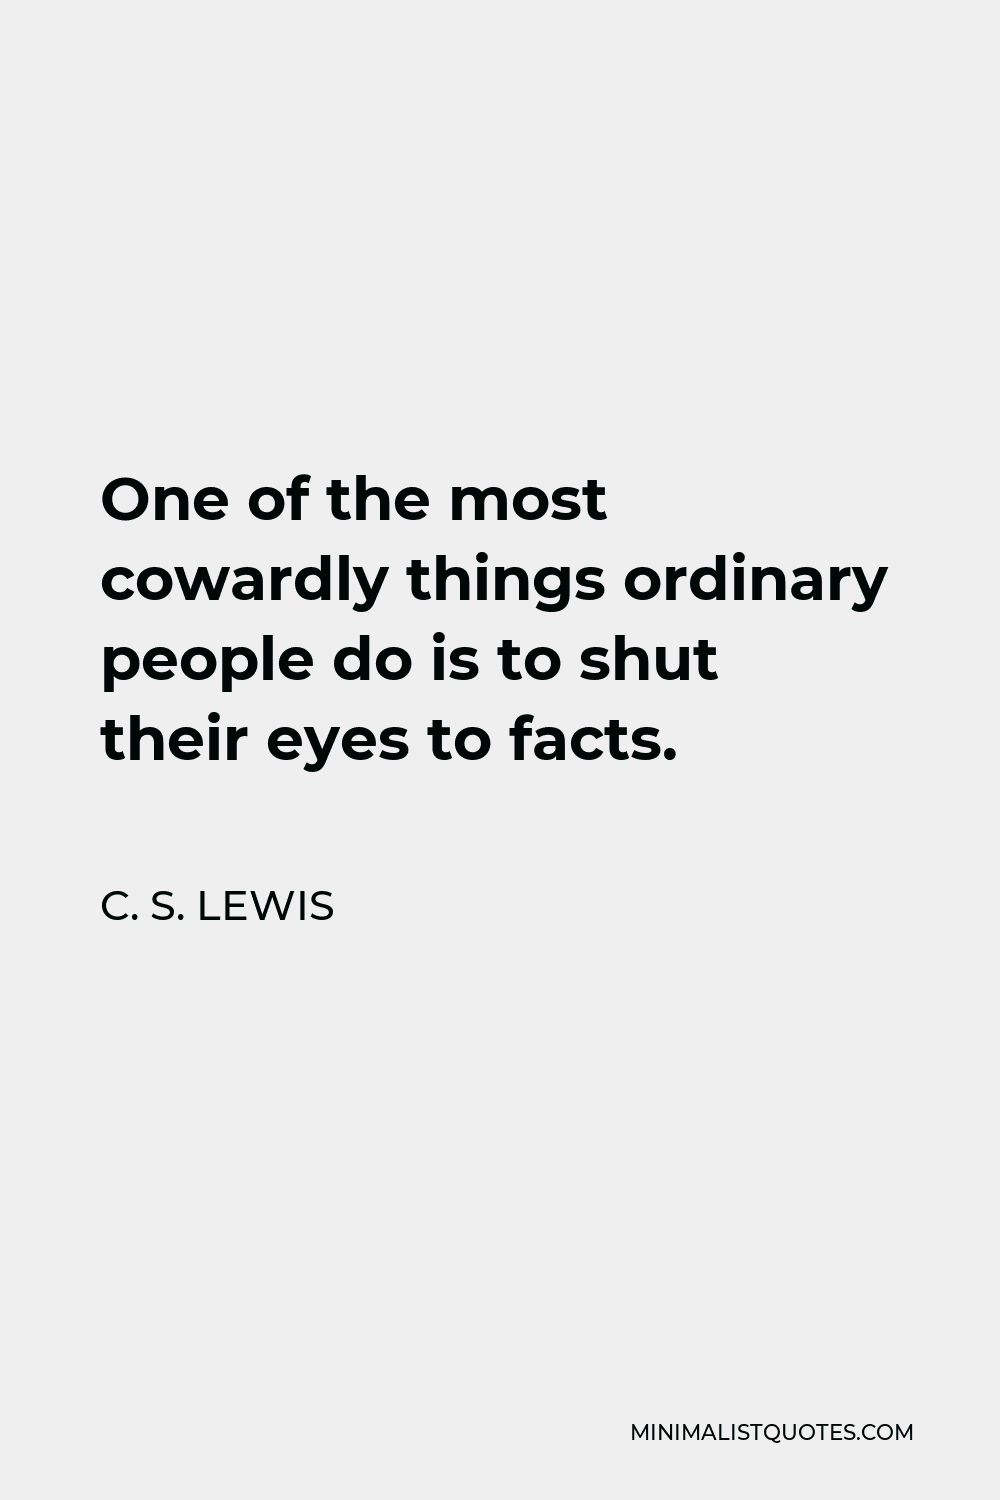 C. S. Lewis Quote - One of the most cowardly things ordinary people do is to shut their eyes to facts.